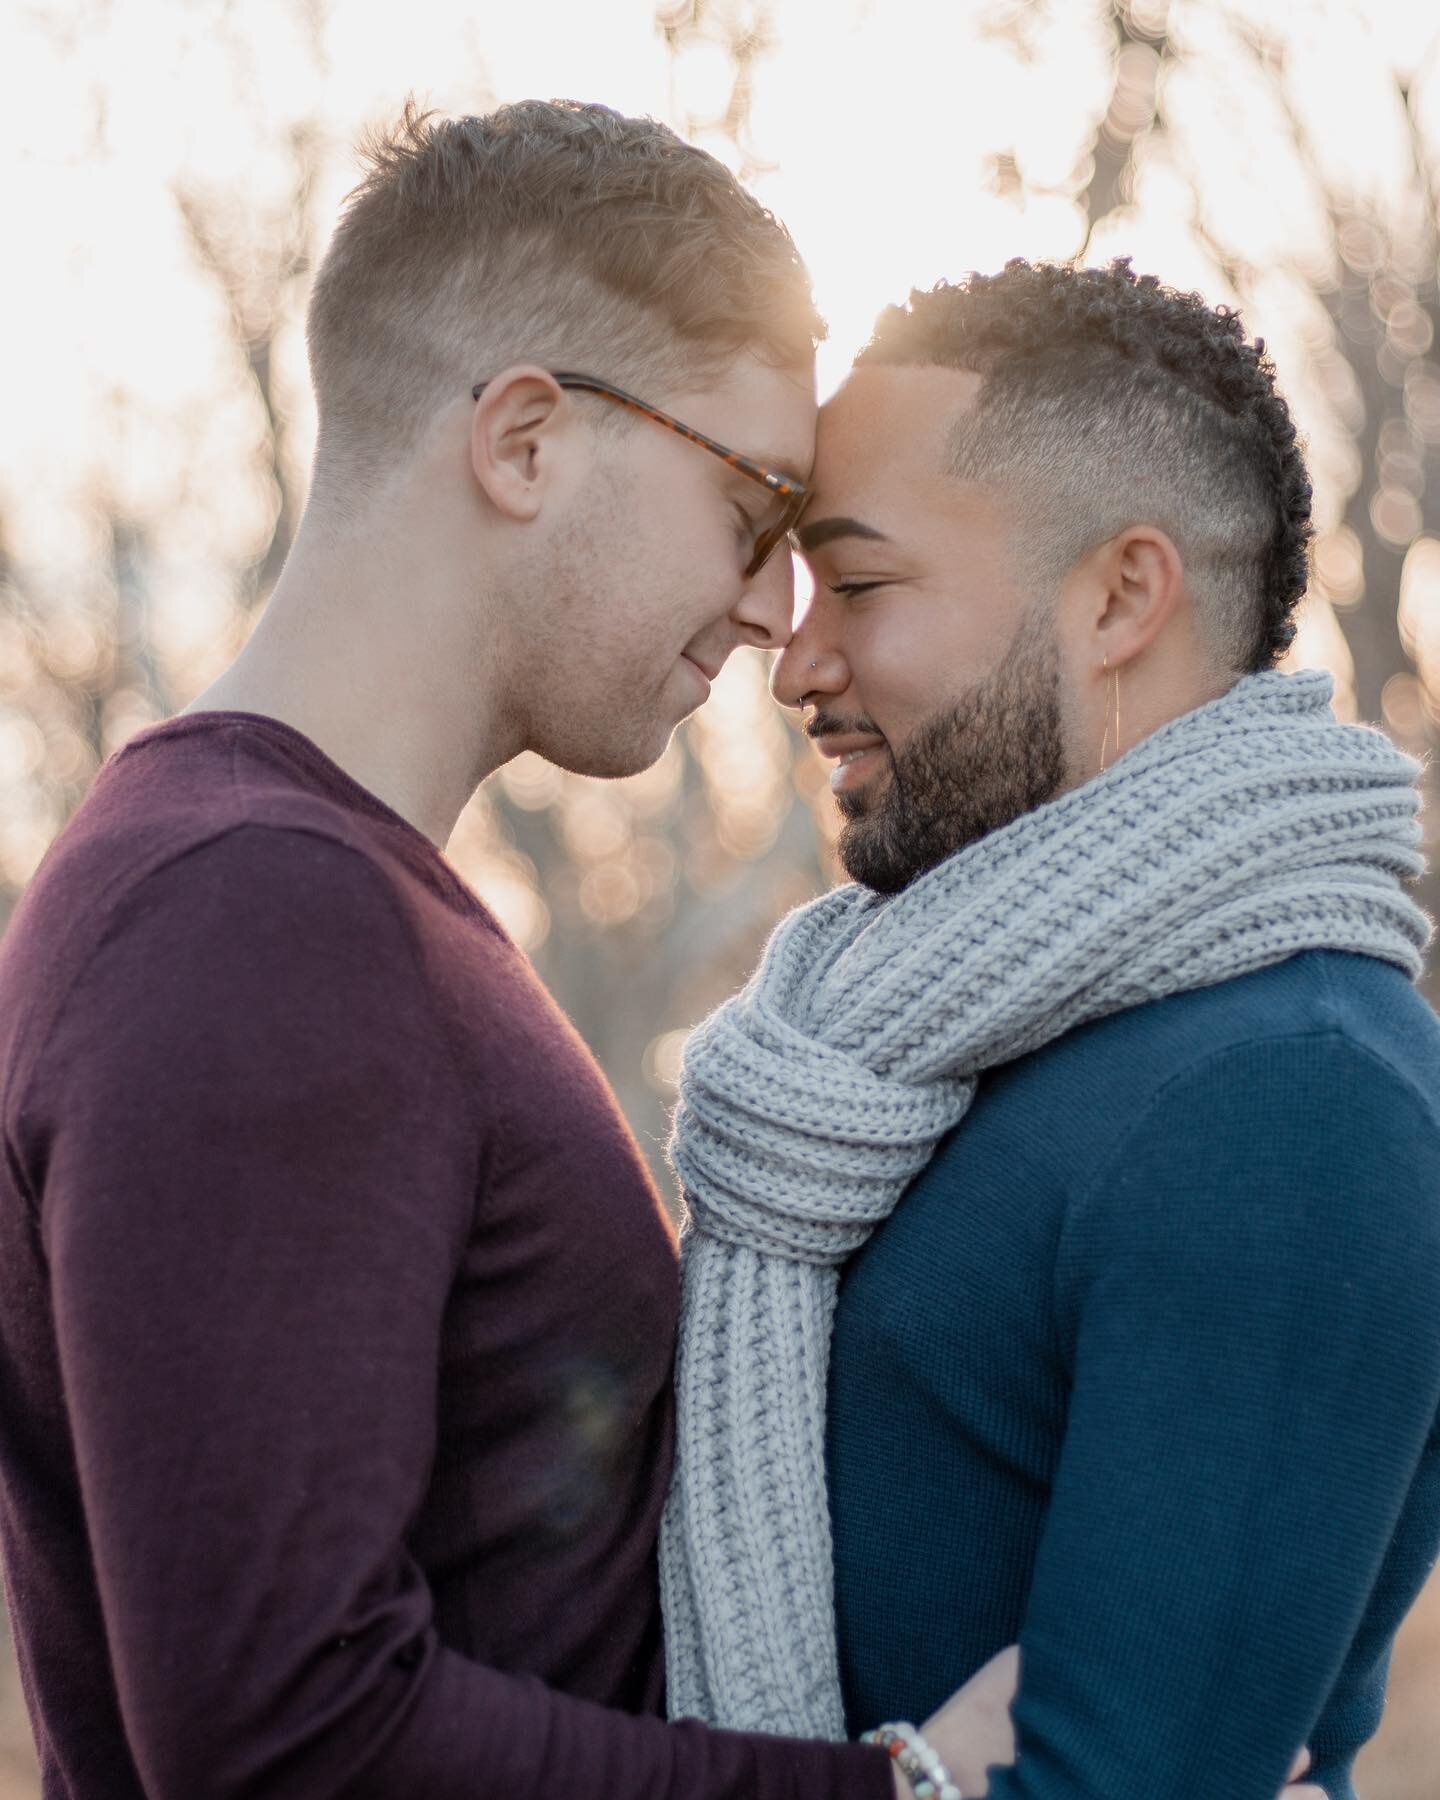 Happy Pride! Want to share this beautiful couple I took last Fall. @iamdiandre @tyler_ray_bilyeu 

Booking available! 

#love #desmoines #iowa #desmoinesphotographer #lgbt #lgbtq #iowaphotographer #pridemonth #pride #loveislove #lovewins #gay #photog